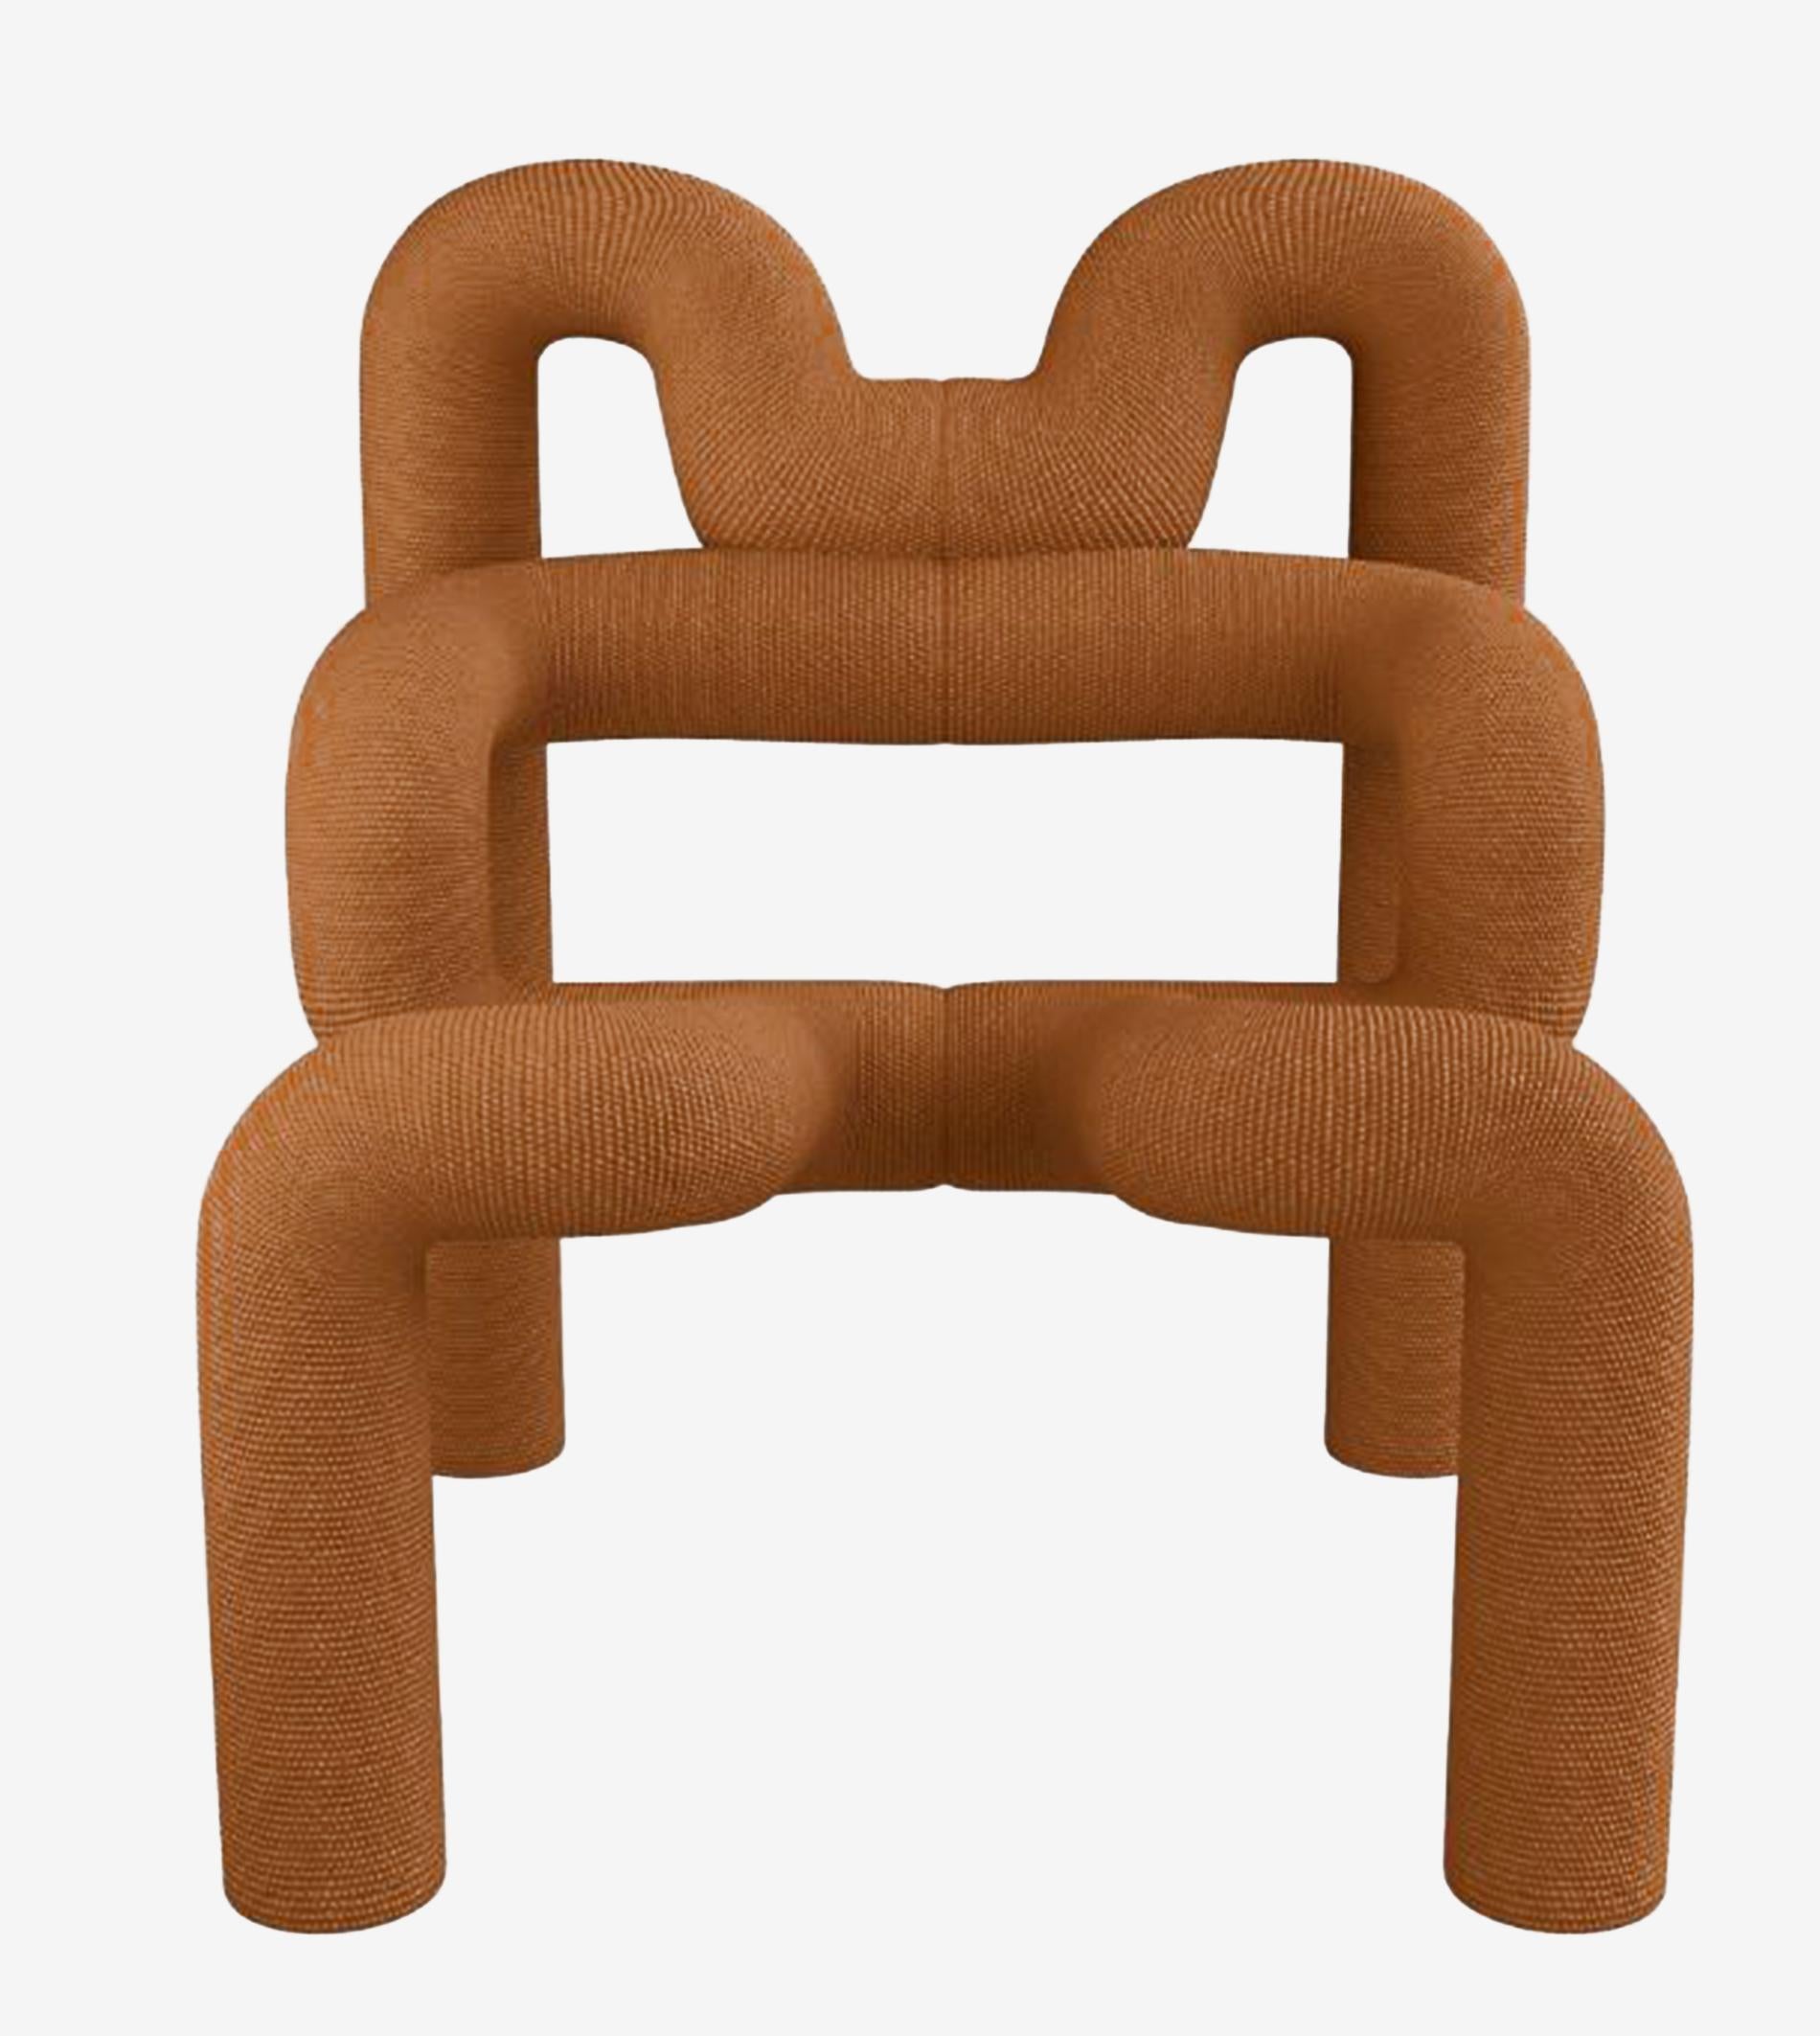 Iconic and stylish armchair from Norway. Designed by Terje Ekstrom.
The chair is both modern and yet very functional. There are endless possibilities for movement and variation whilst sitting. The design dates from the 1980s. The color is burned